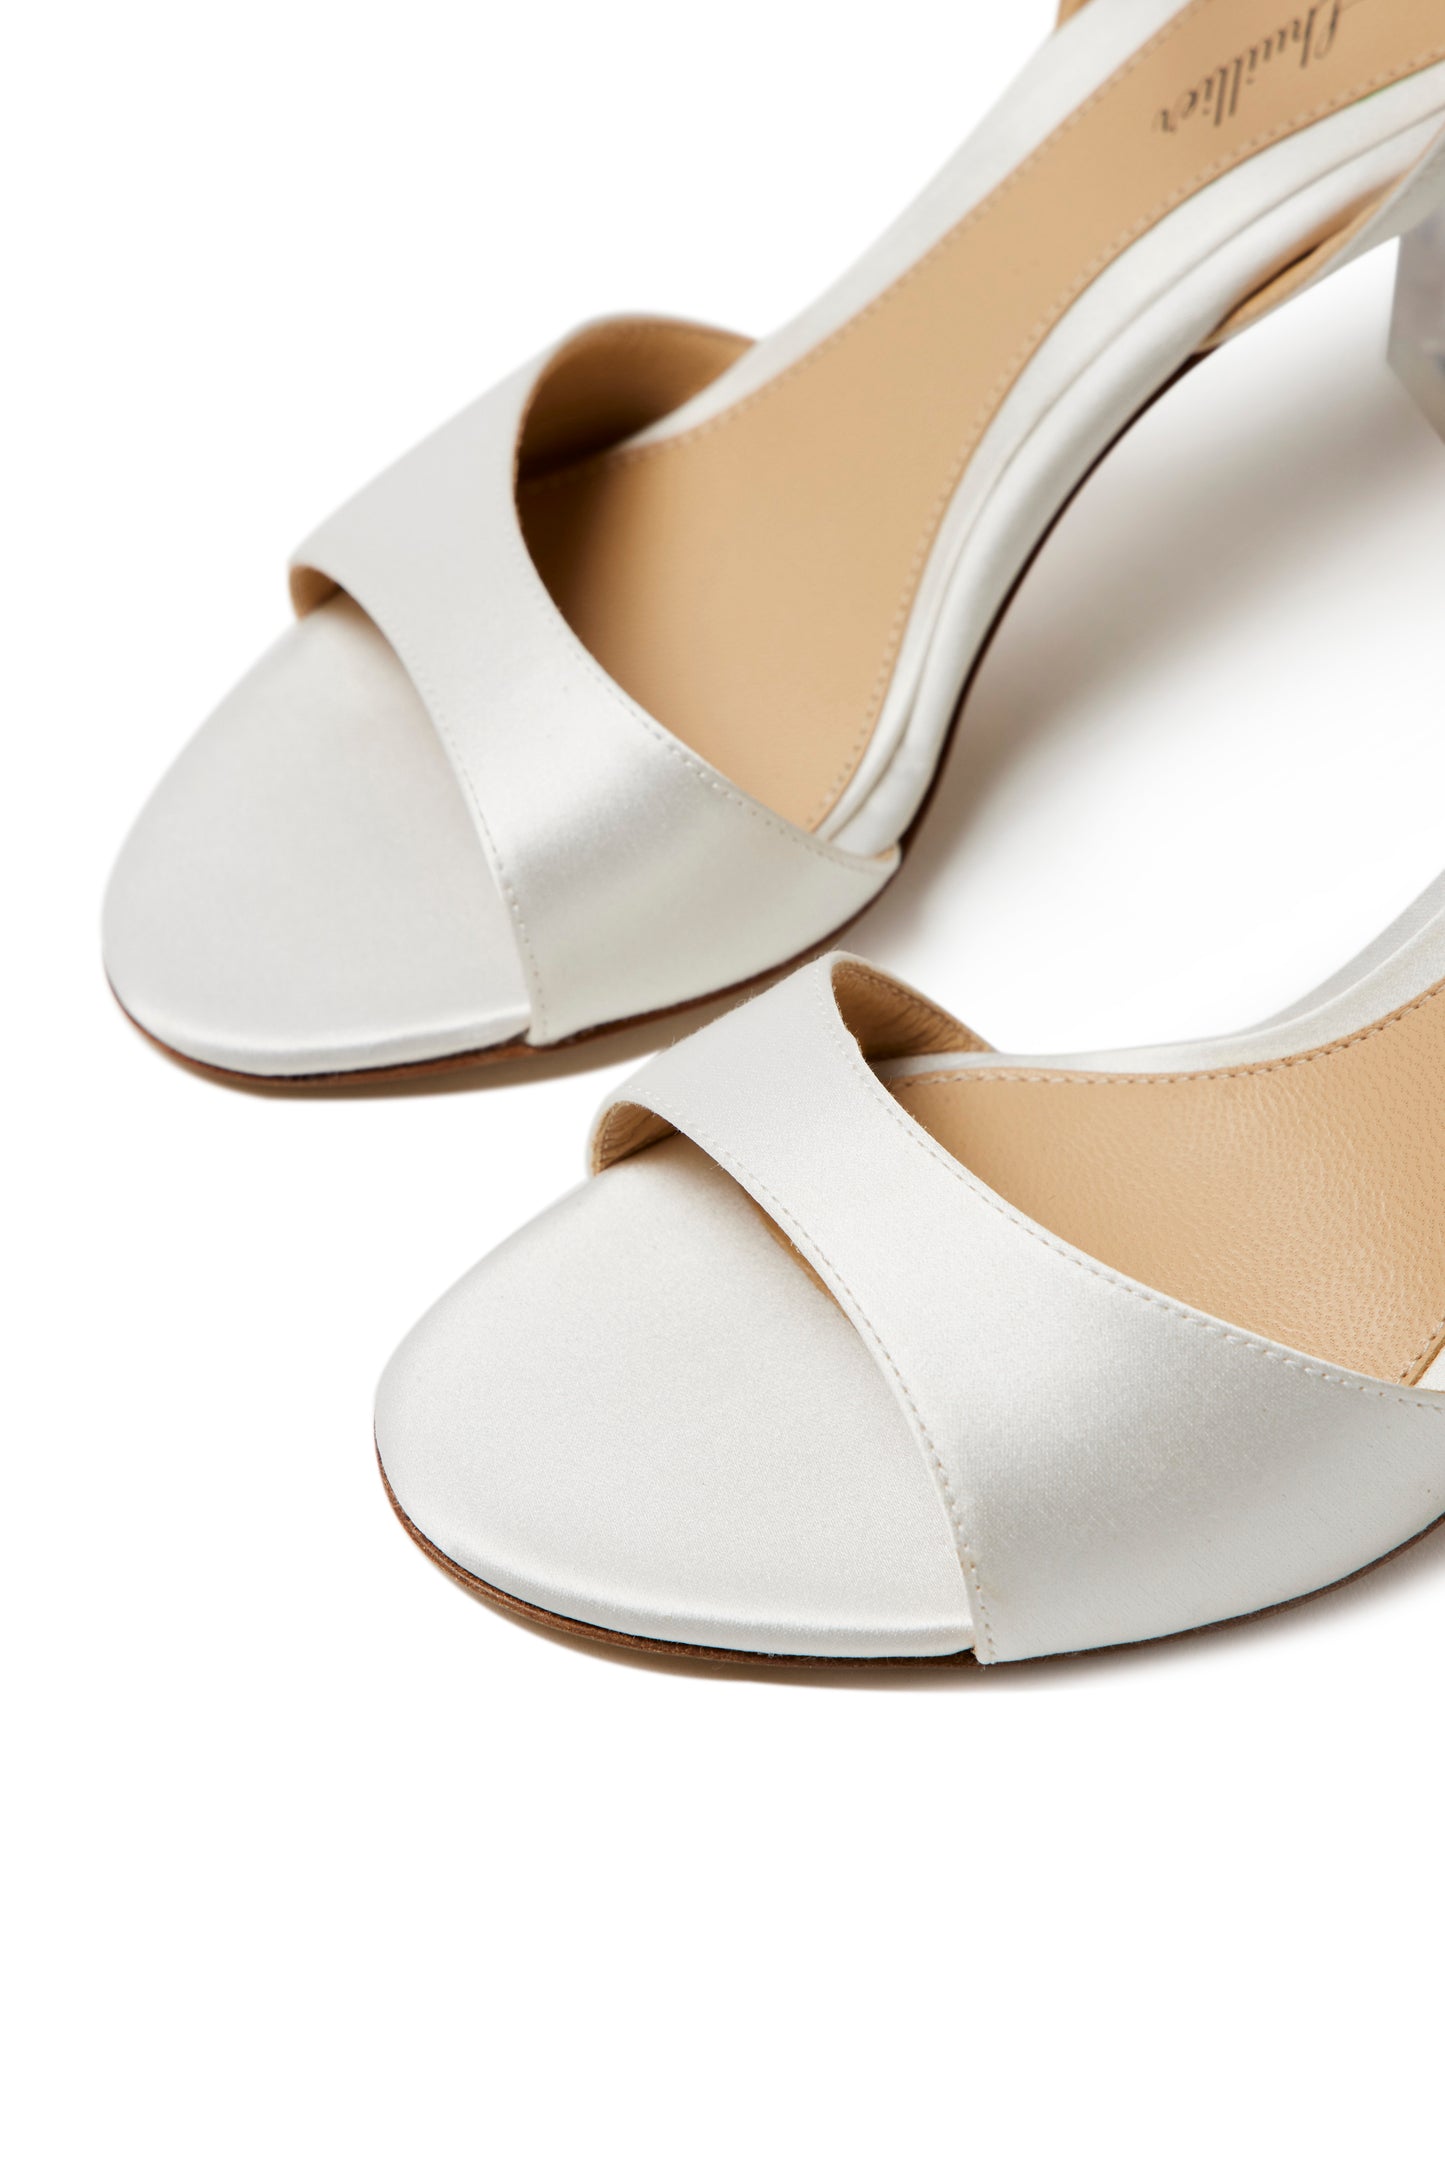 White satin sandal with adjustable ankle strap and 80mm ombre lucite heel.